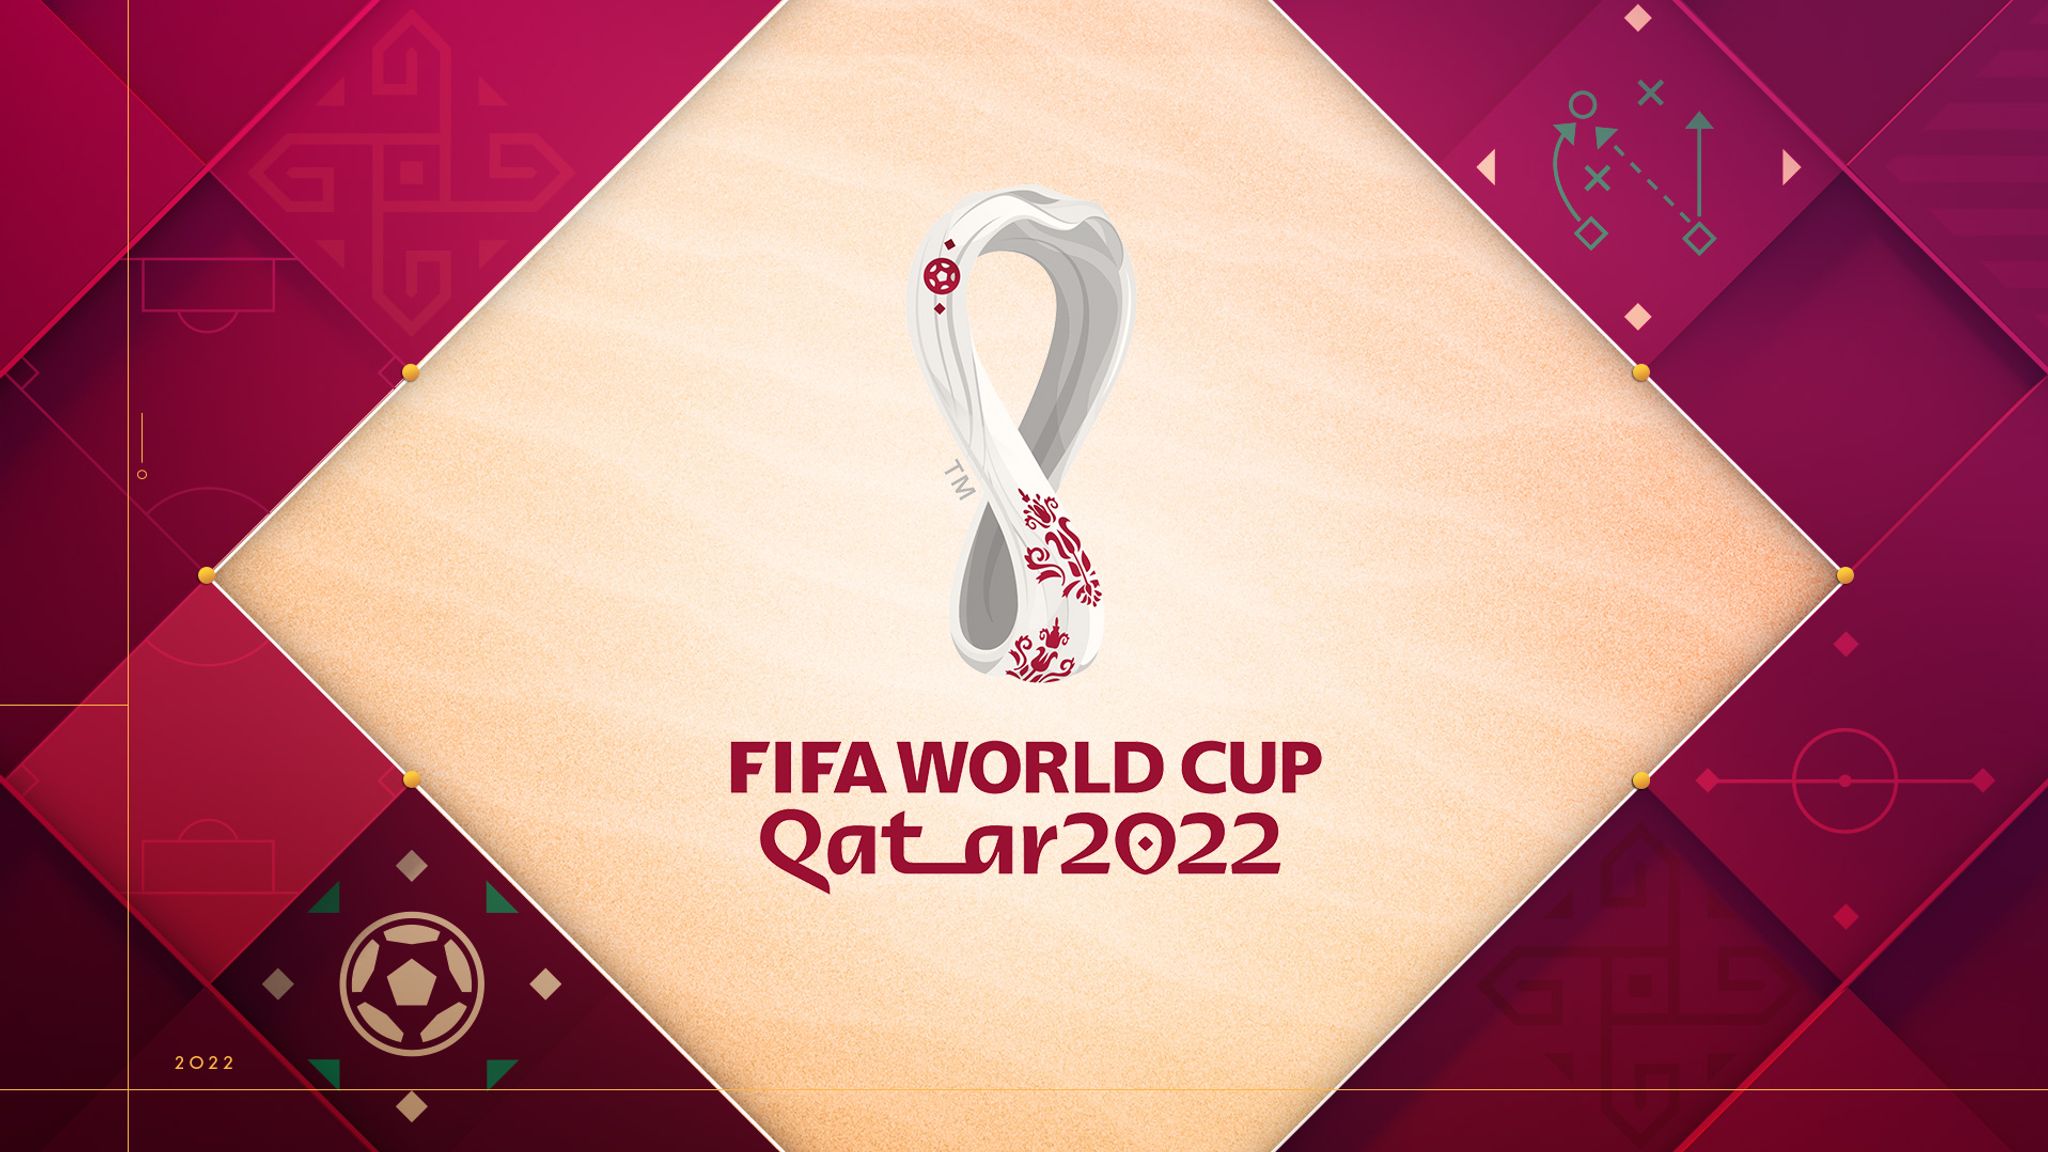 World Cup 2022: Dates, Draw, Schedule, Kick Off Times, Final For Qatar Tournament